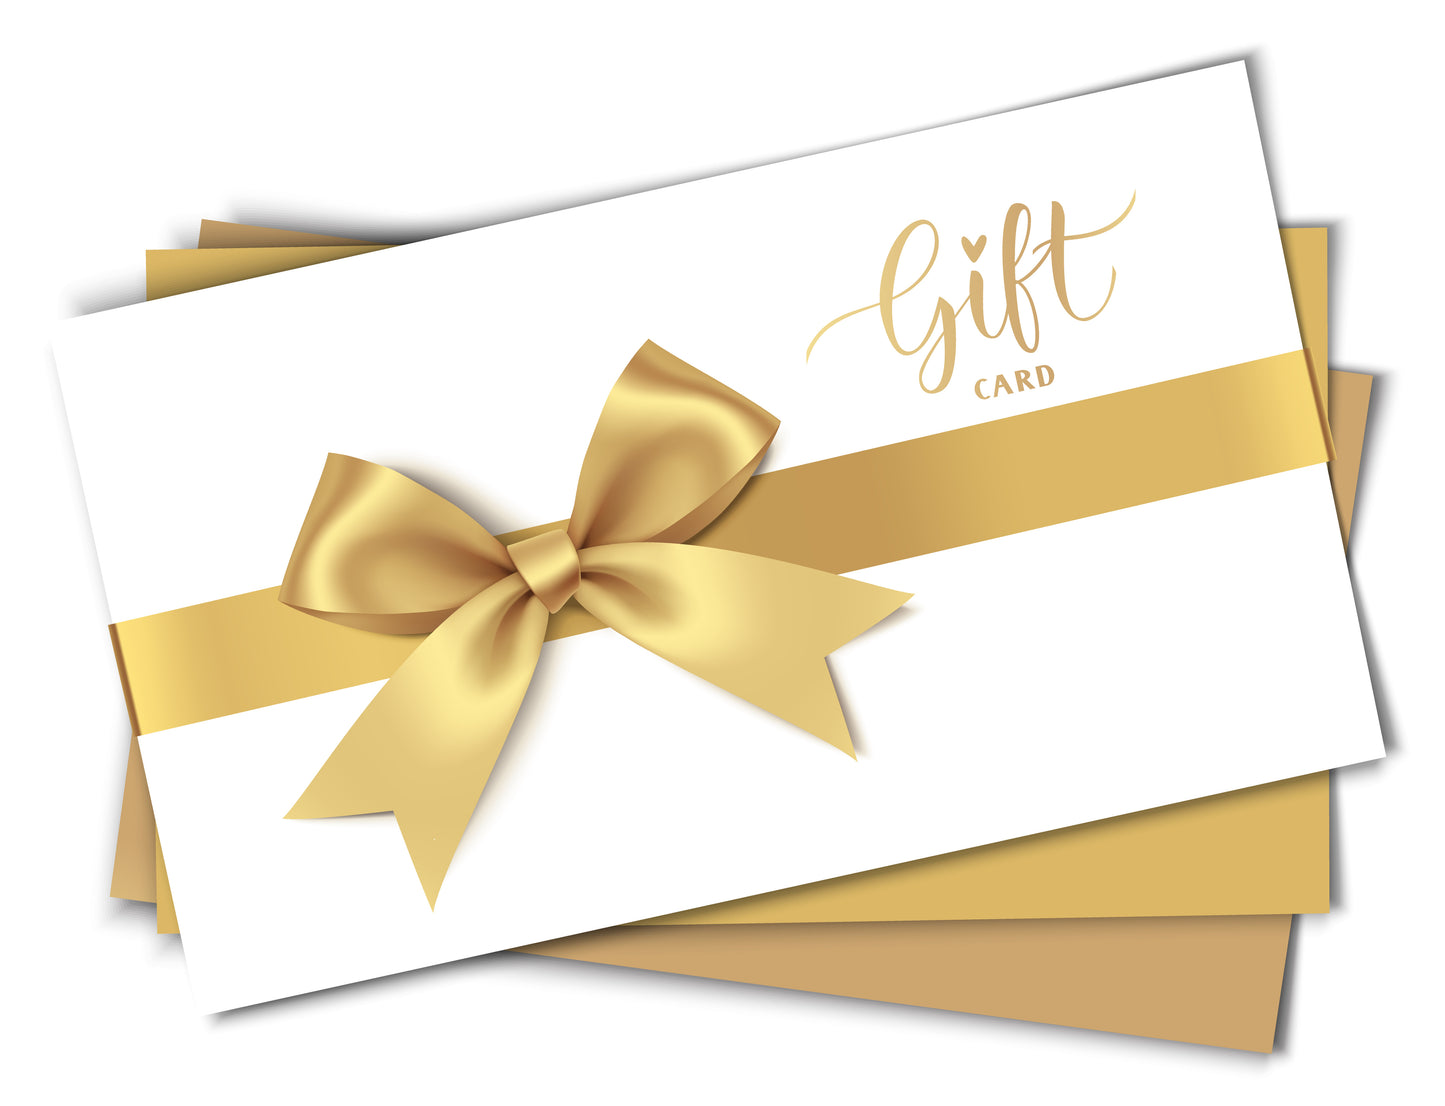 Ulster Ceramics Pottery Supplies Gift Card